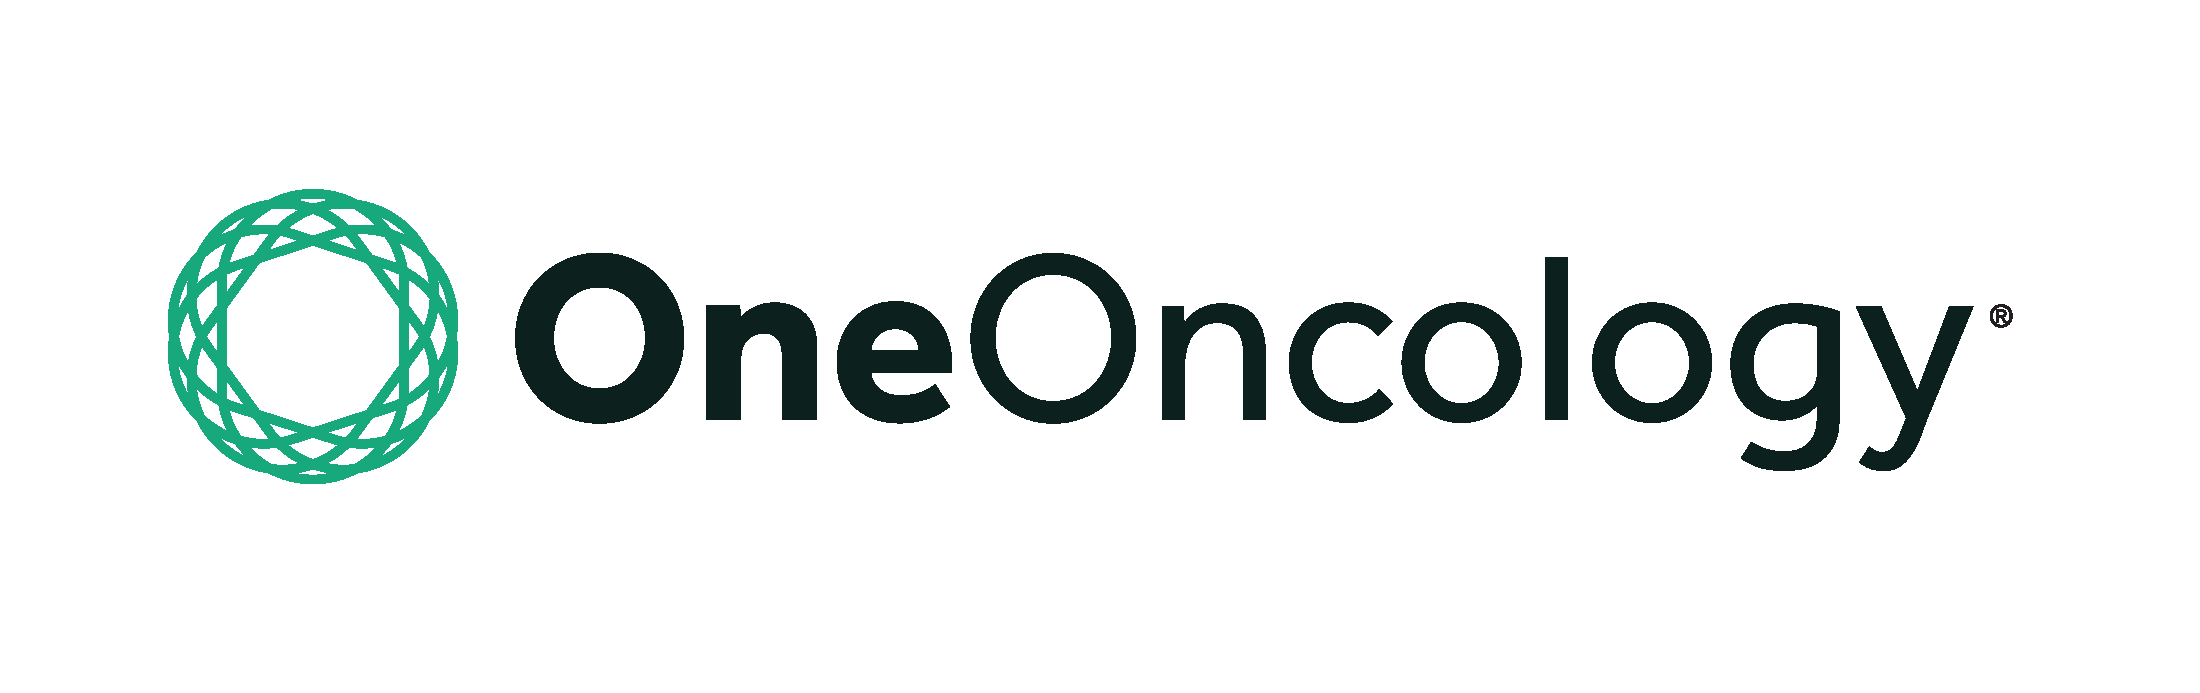 One Oncology